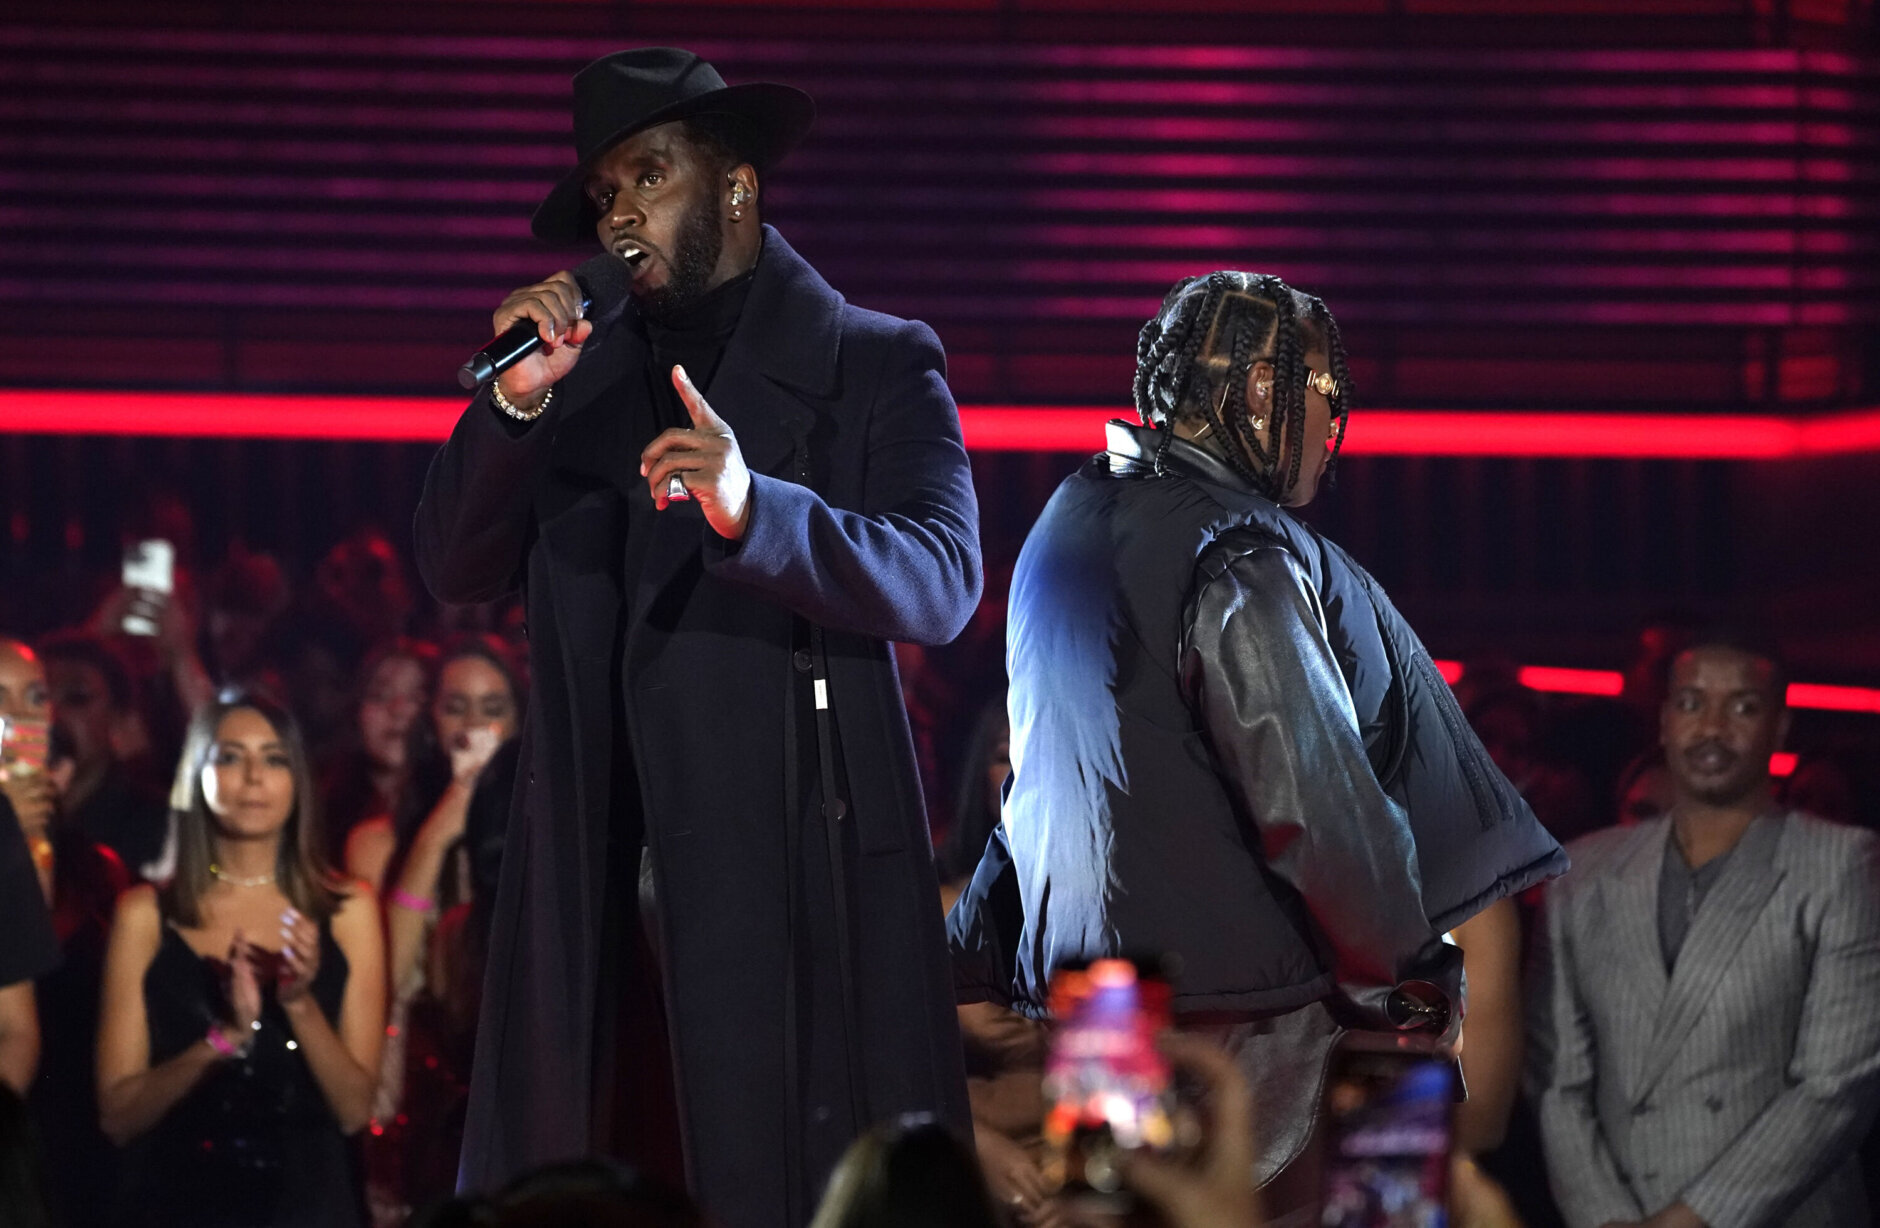 Sean "Diddy" Combs, left, and Jozzy speak onstage at the Billboard Music Awards on Sunday, May 15, 2022, at the MGM Grand Garden Arena in Las Vegas. (AP Photo/Chris Pizzello)